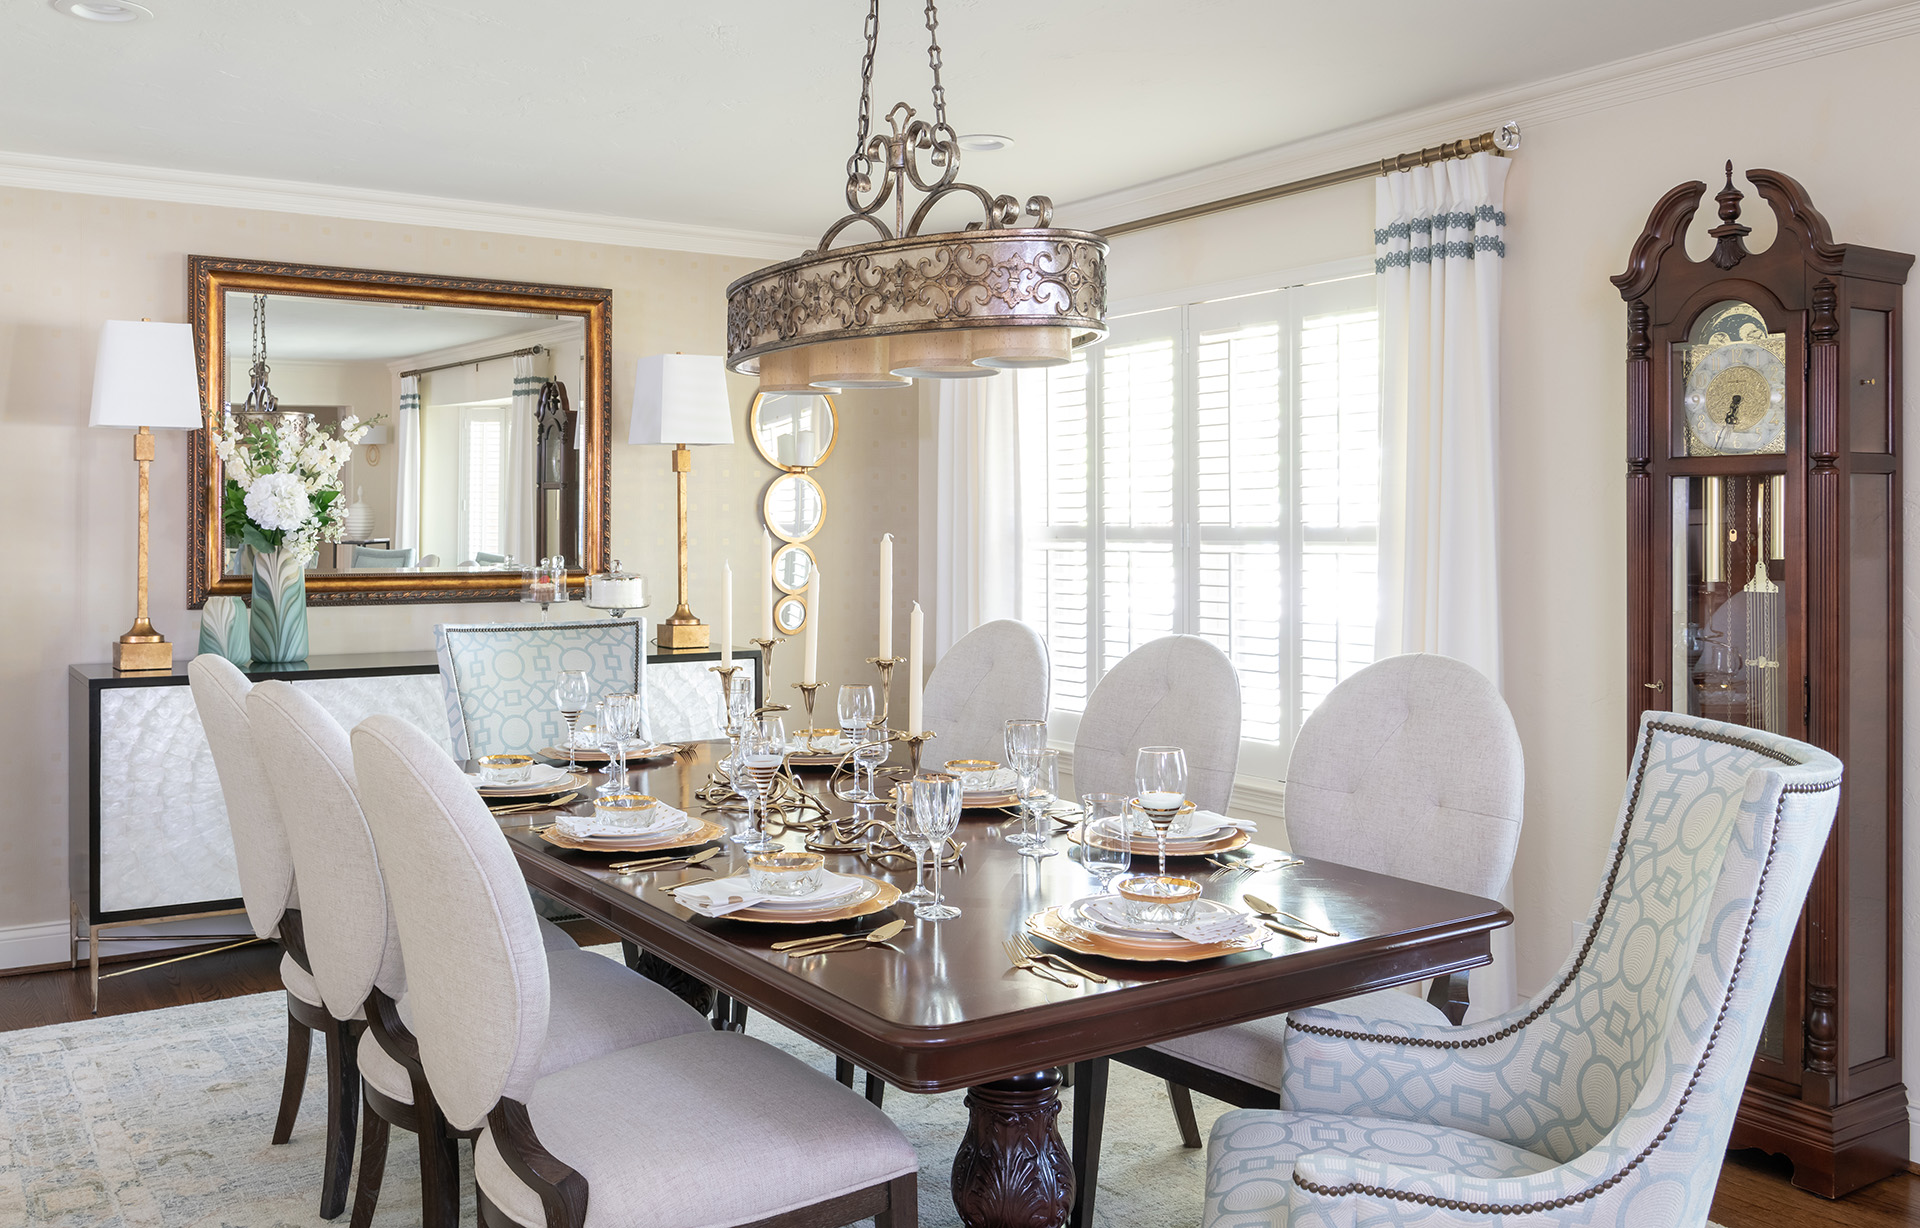 Transitional or eclectic dining room?